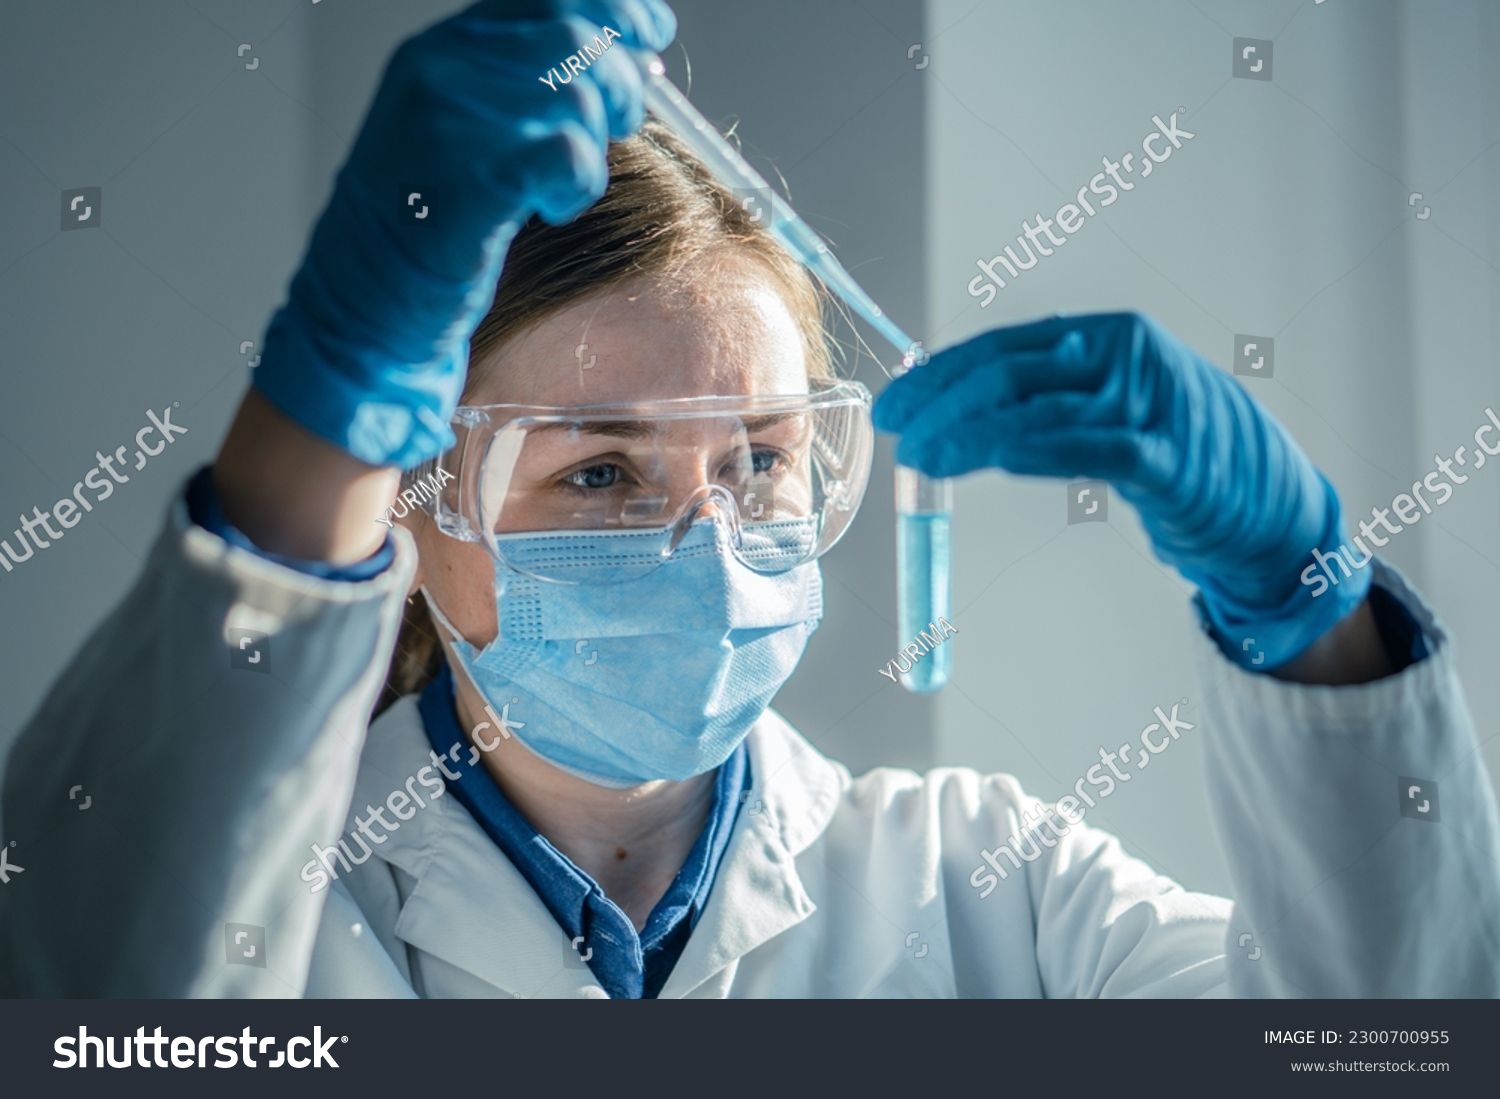 Photo shows chemist working on new technologies in a medical laboratory to improve diagnosis and treatment of diseases. Experiment in biological laboratory to determine effectiveness new medication. #2300700955